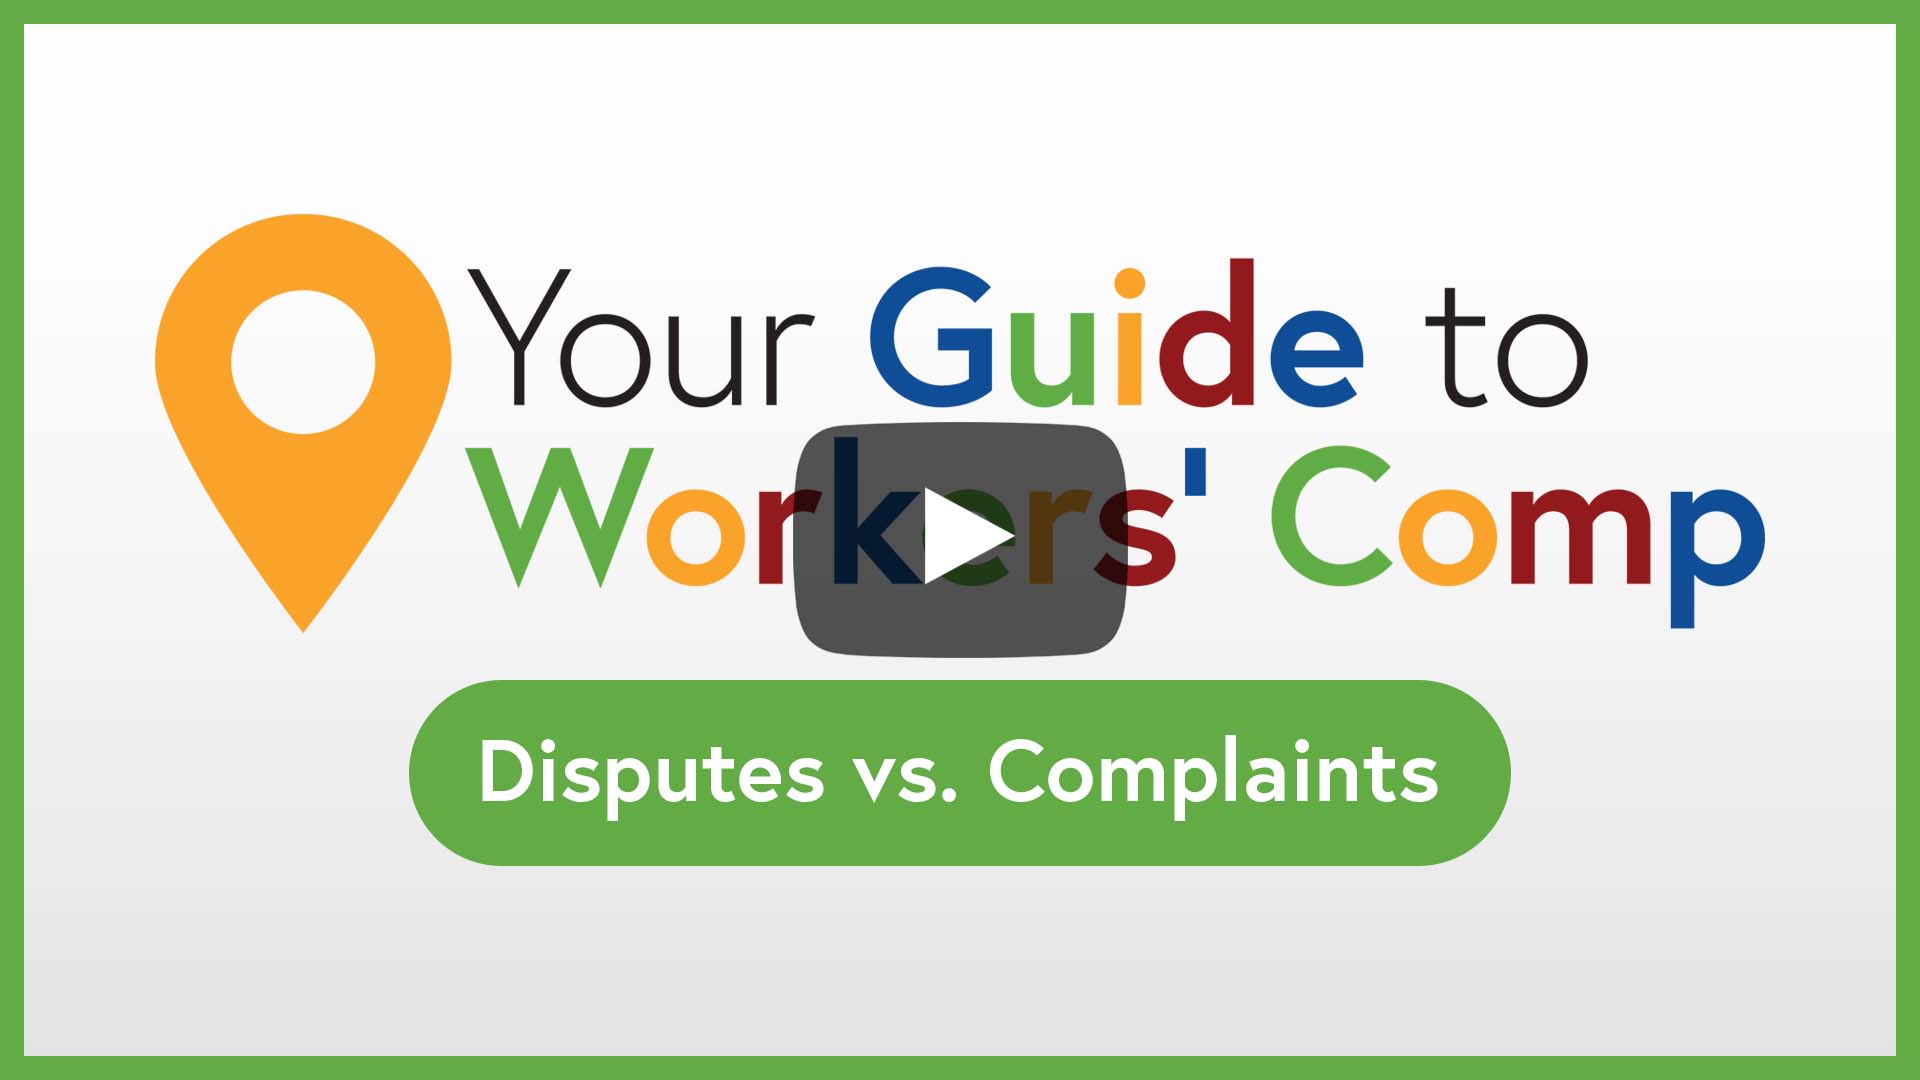 Your Guide to Workers' Comp - Disputes vs. Complaints